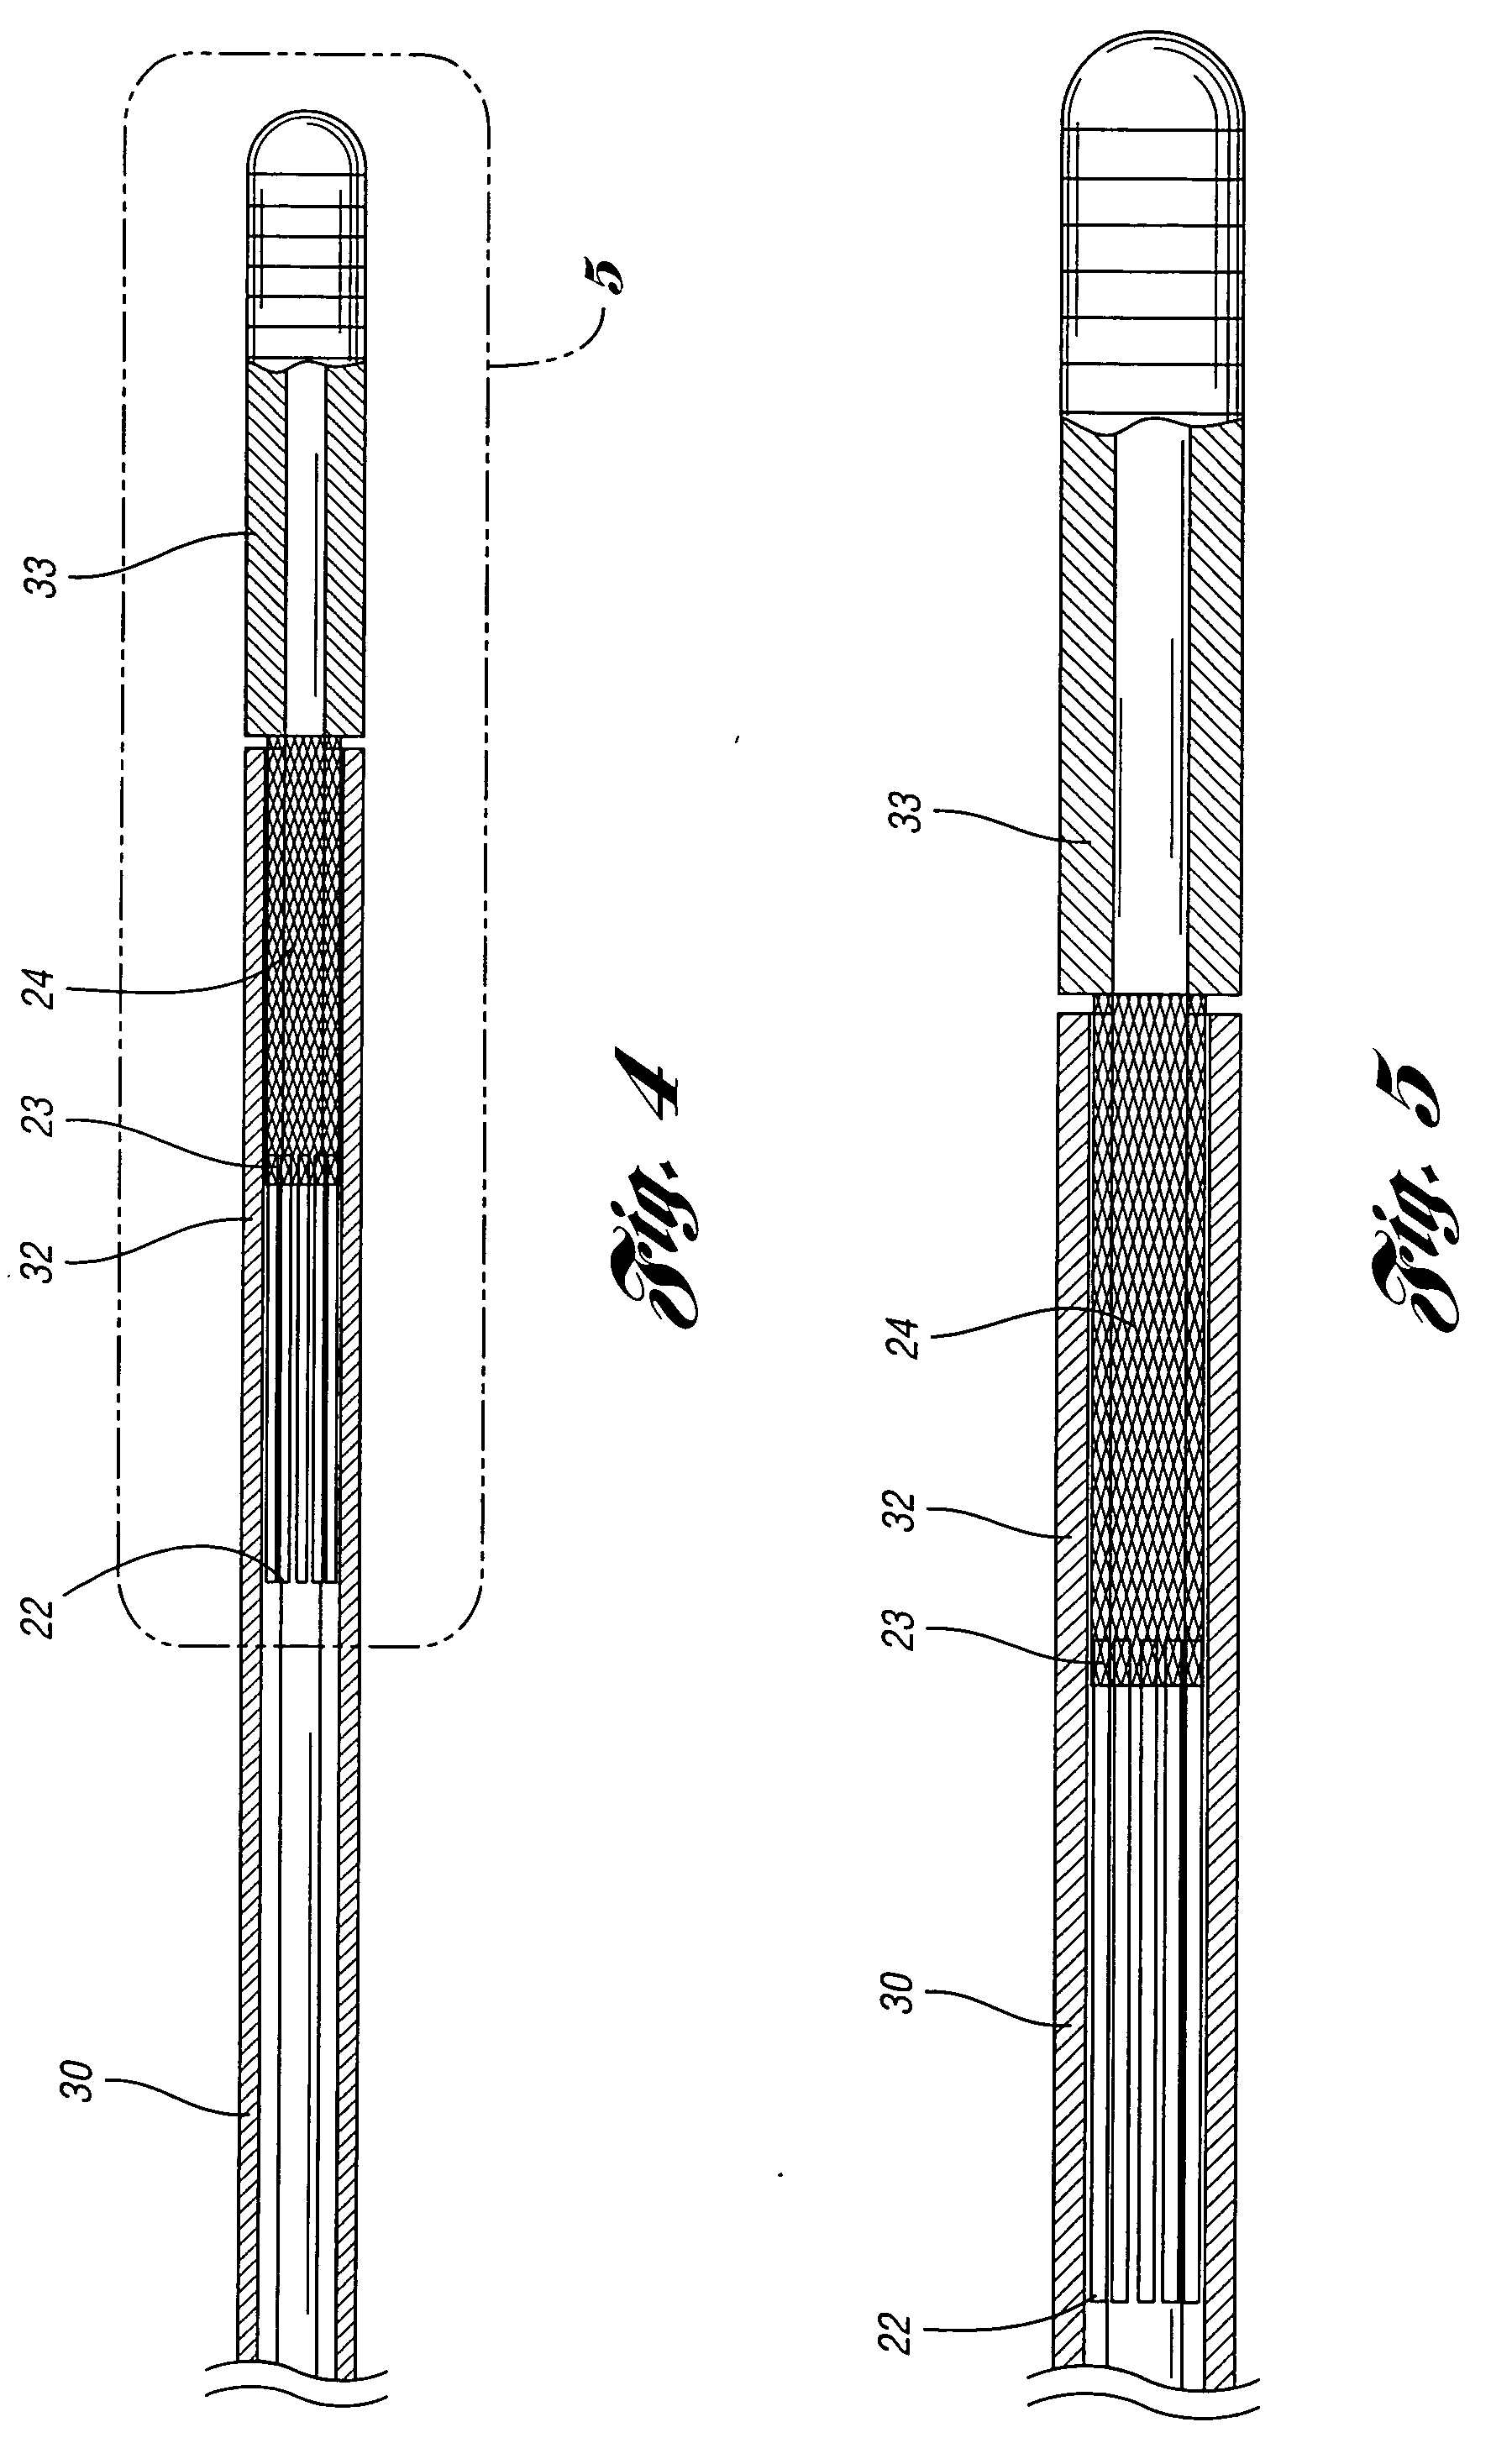 Embolic protection device having reduced profile